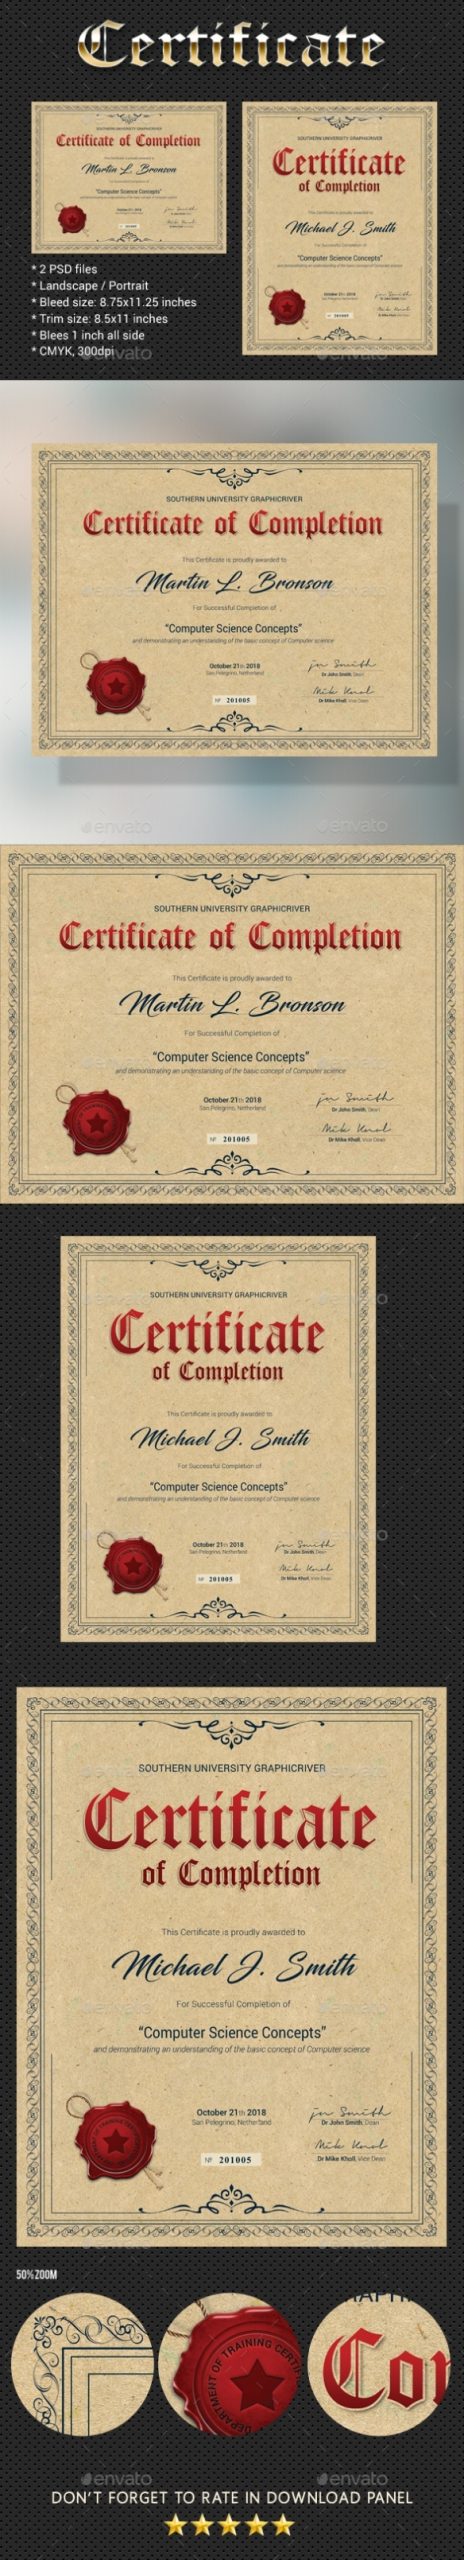 Walking Certificate Templates » Dondrup With Walking Certificate Templates